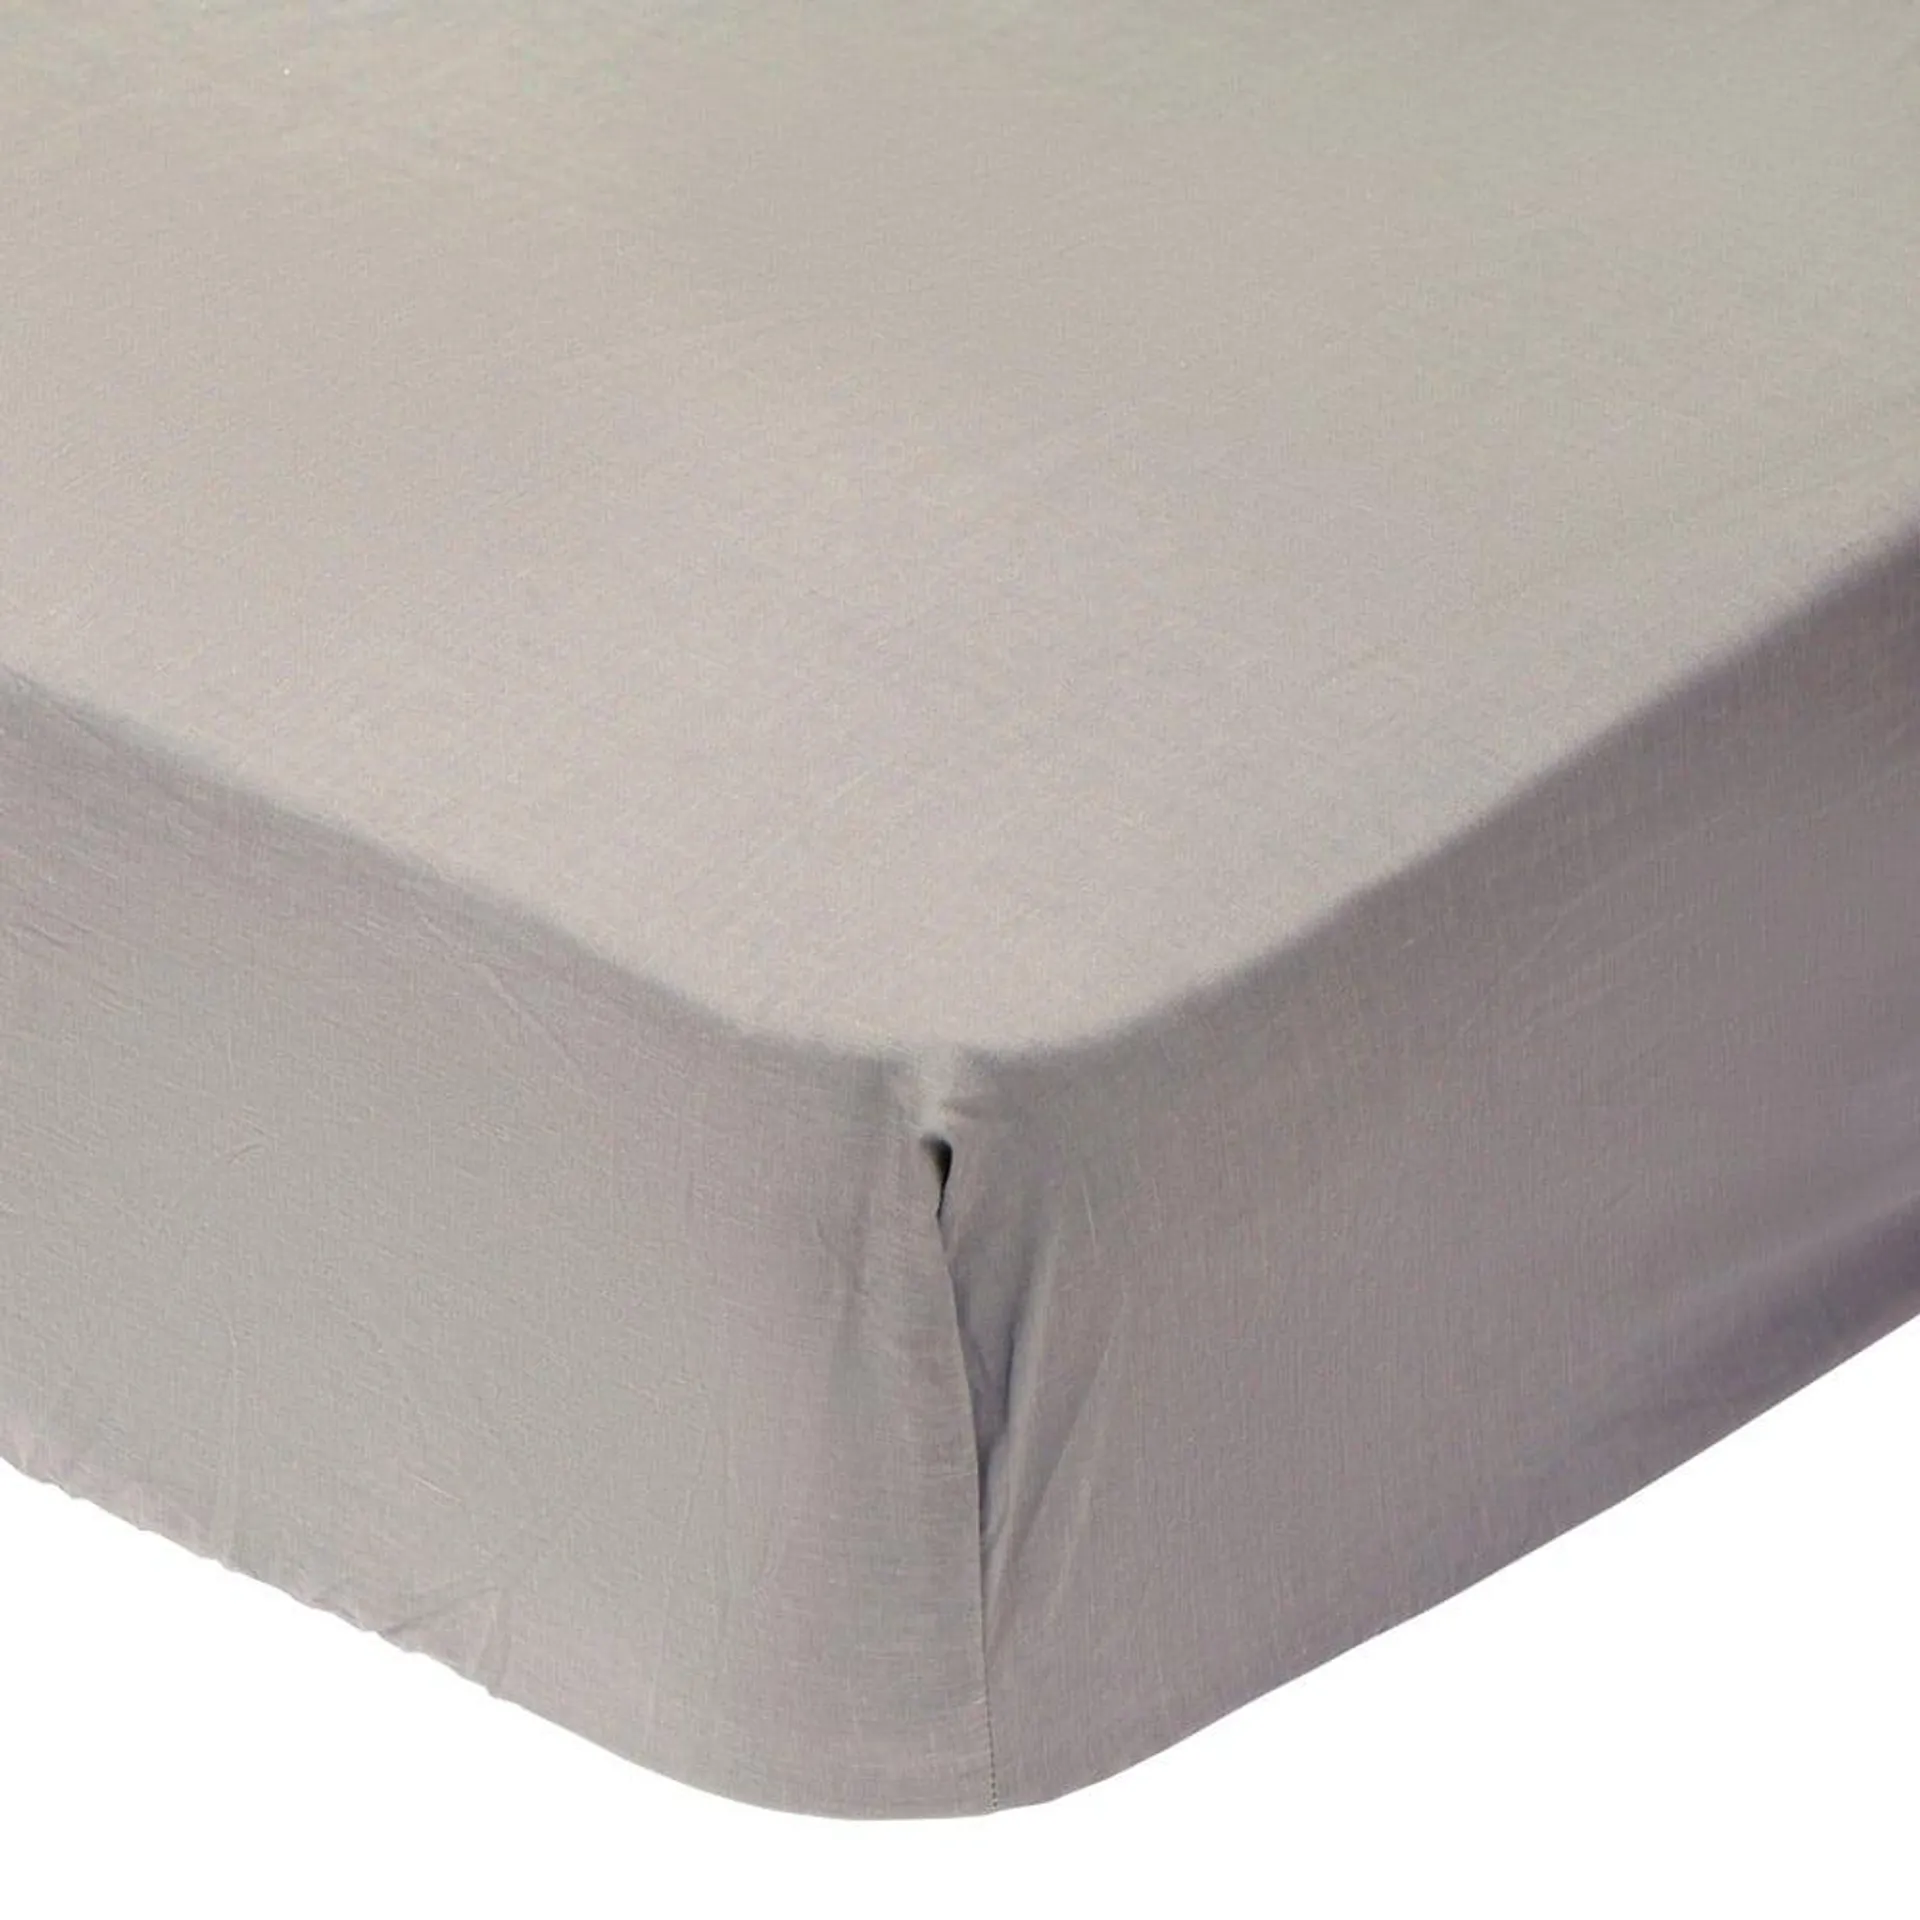 Wilko Best Double Porpoise 300 Thread Count Percale Flat Sheet